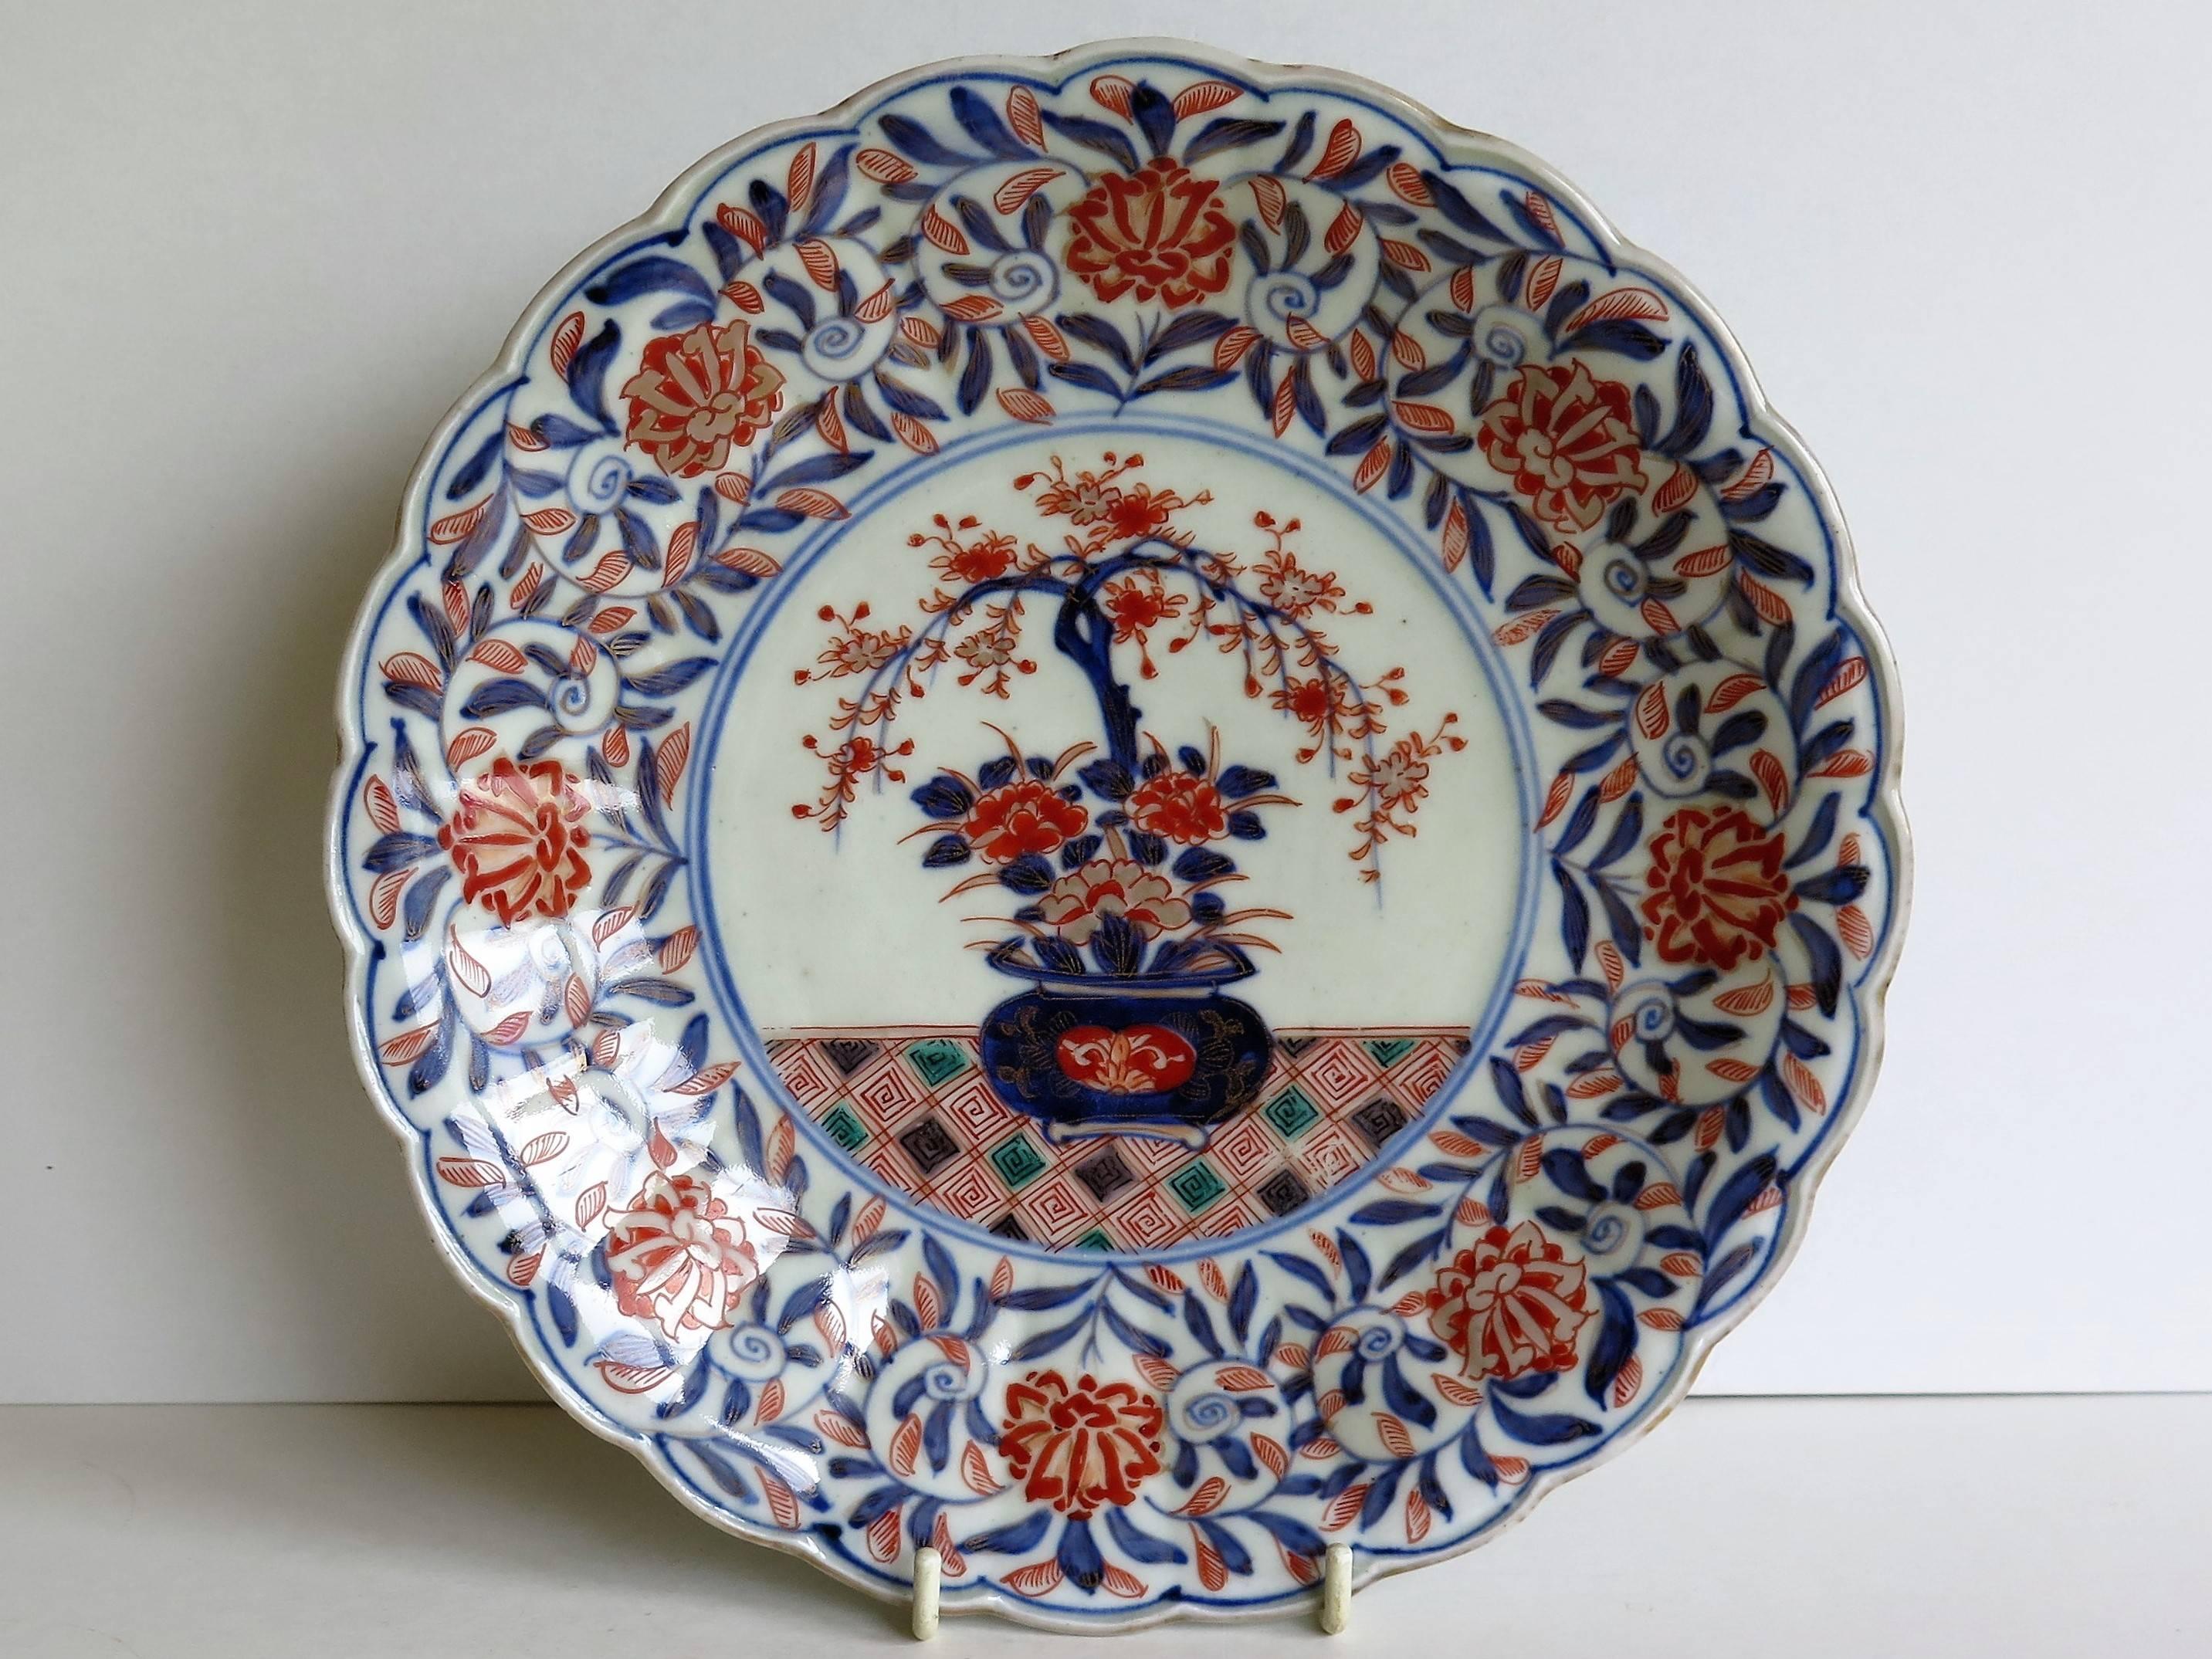 This is a nice quality Japanese Porcelain deep plate or dish with an Imari pattern, dating to the mid-19th century, or possibly earlier.

The plate is decorated in varying shades of under-glaze cobalt blue, then hand enamelled with blue, burnt